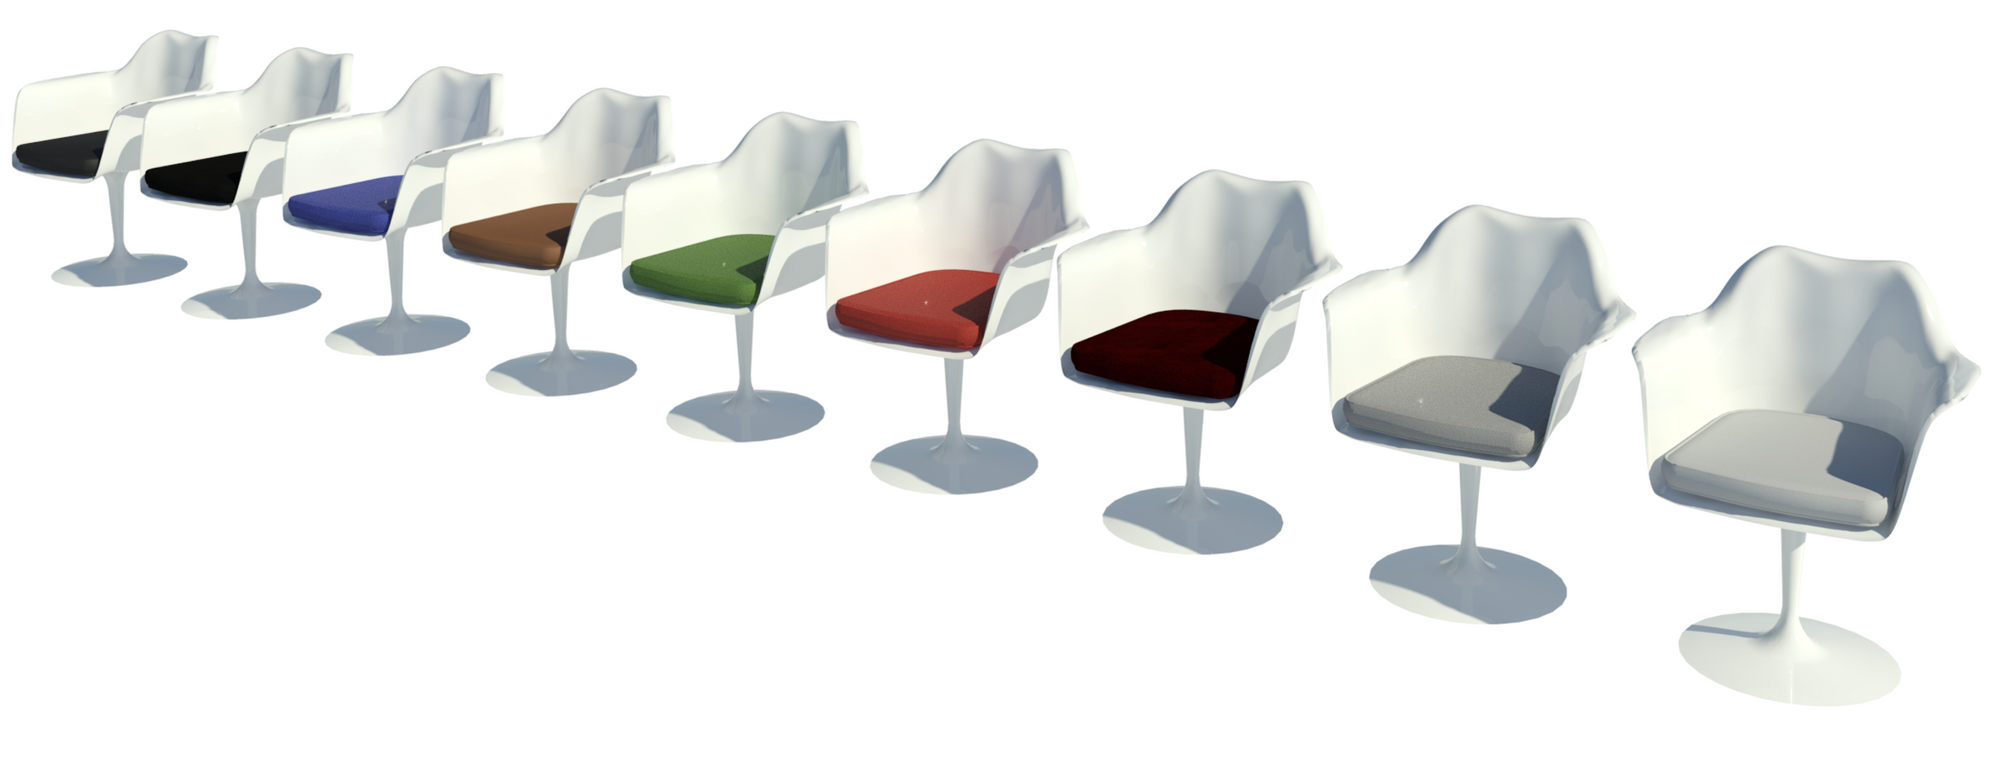 Revit raytrace showing nine white body types of Tulip chair.